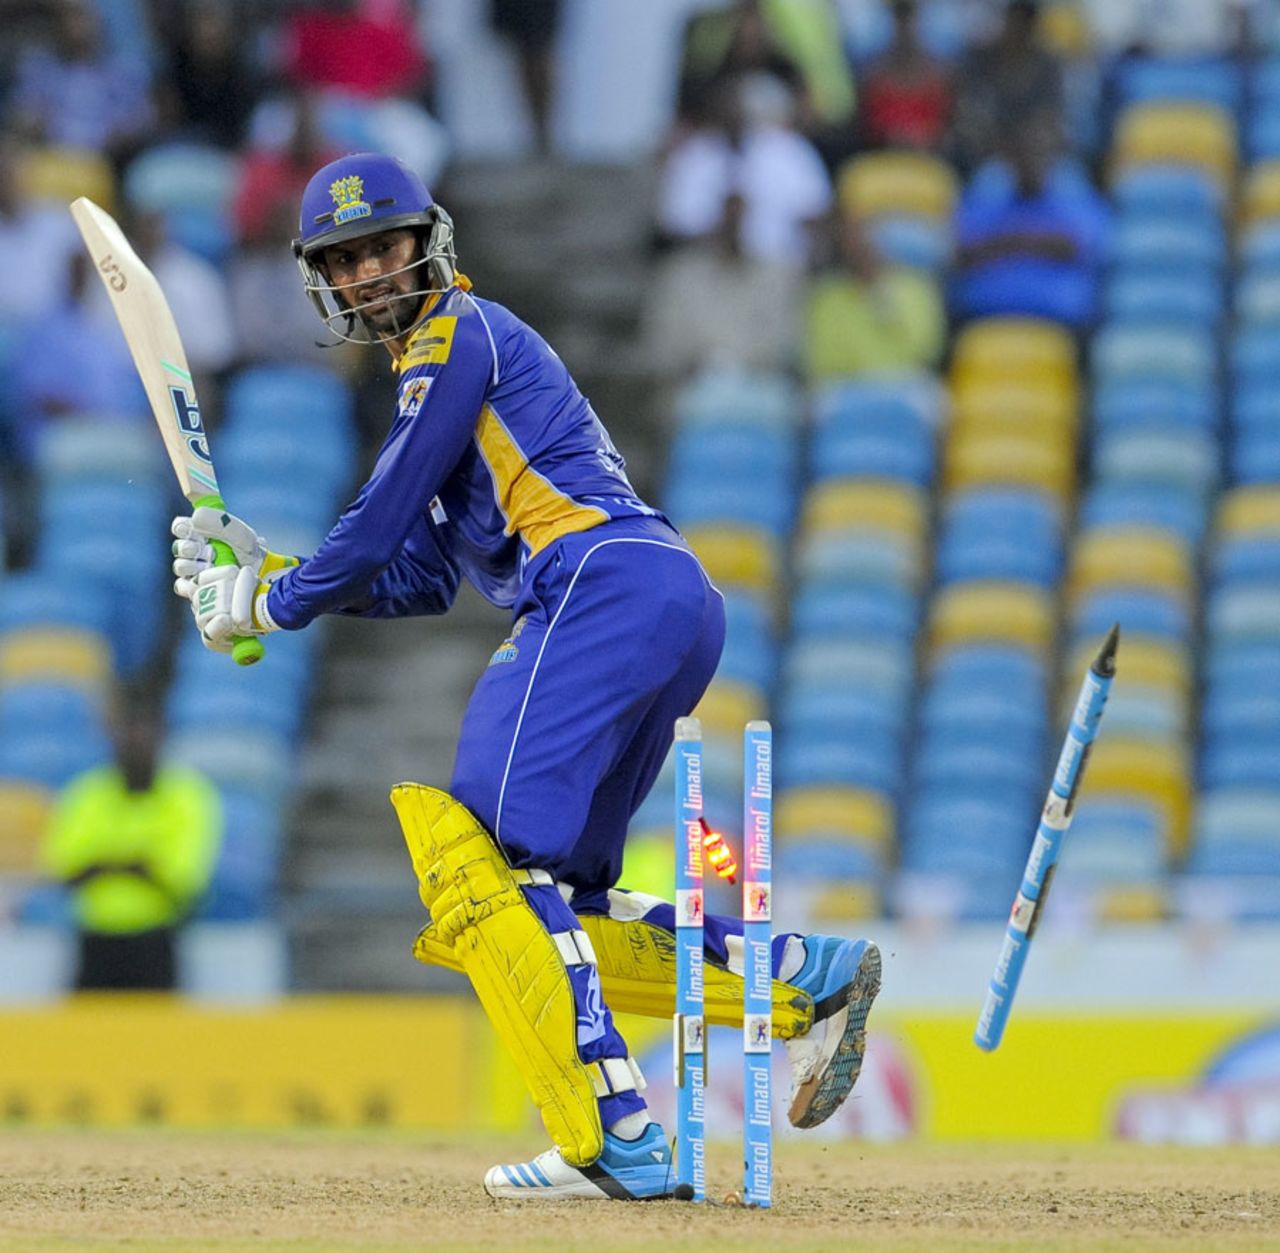 Shoaib Malik was bowled by Tino Best for 49, Barbados Tridents v St Lucia Zouks, CPL 2014, Bridgetown, July 23, 2014